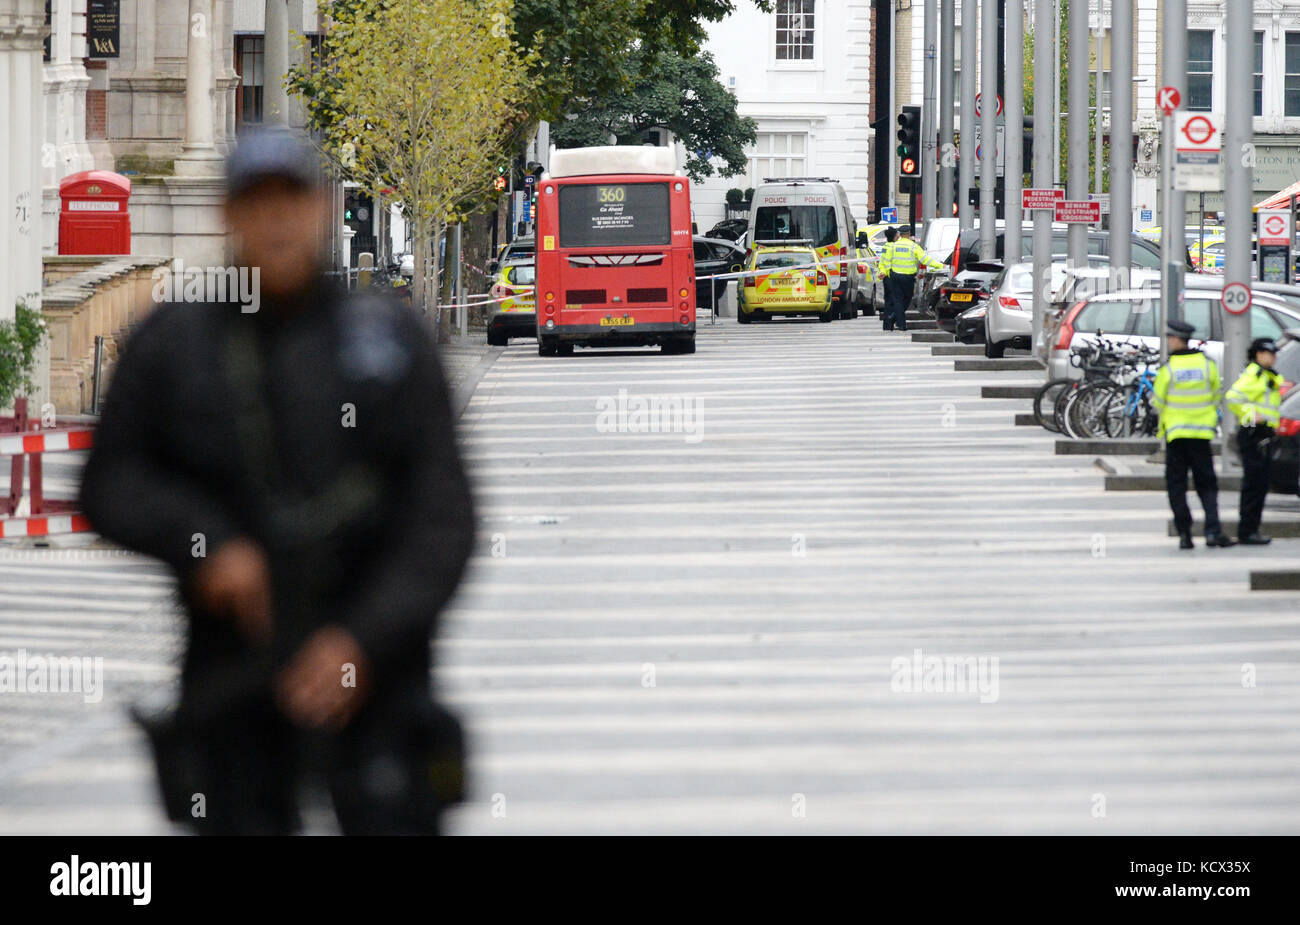 Emergency services at the scene on Exhibition Road in London, after several people have been injured after a car reportedly ploughed into people outside the Natural History Museum. Stock Photo